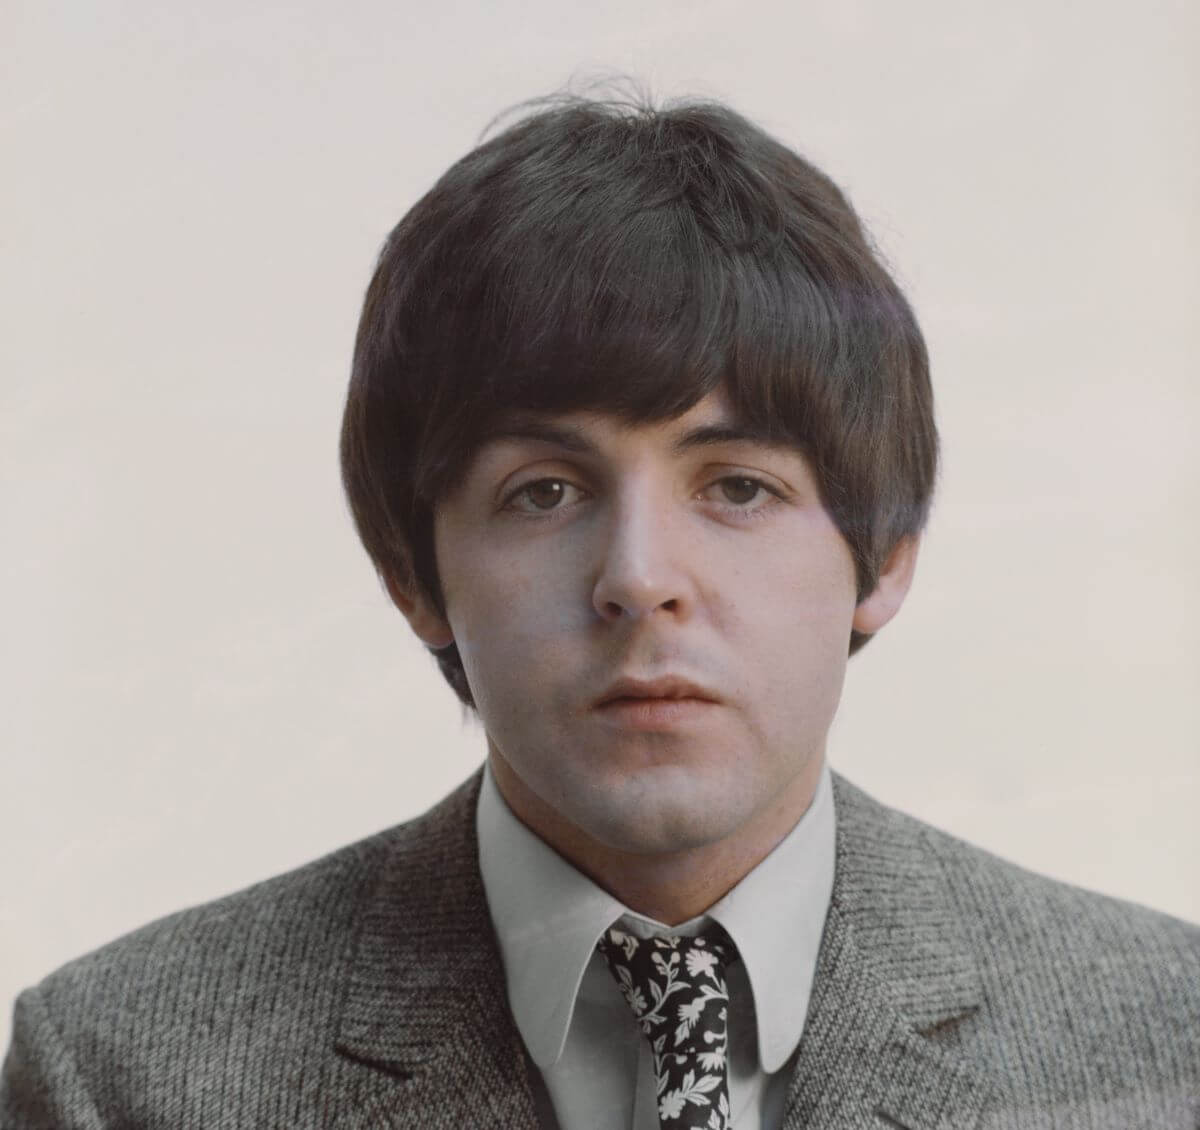 Paul McCartney wears a gray suit with a black and white floral tie.